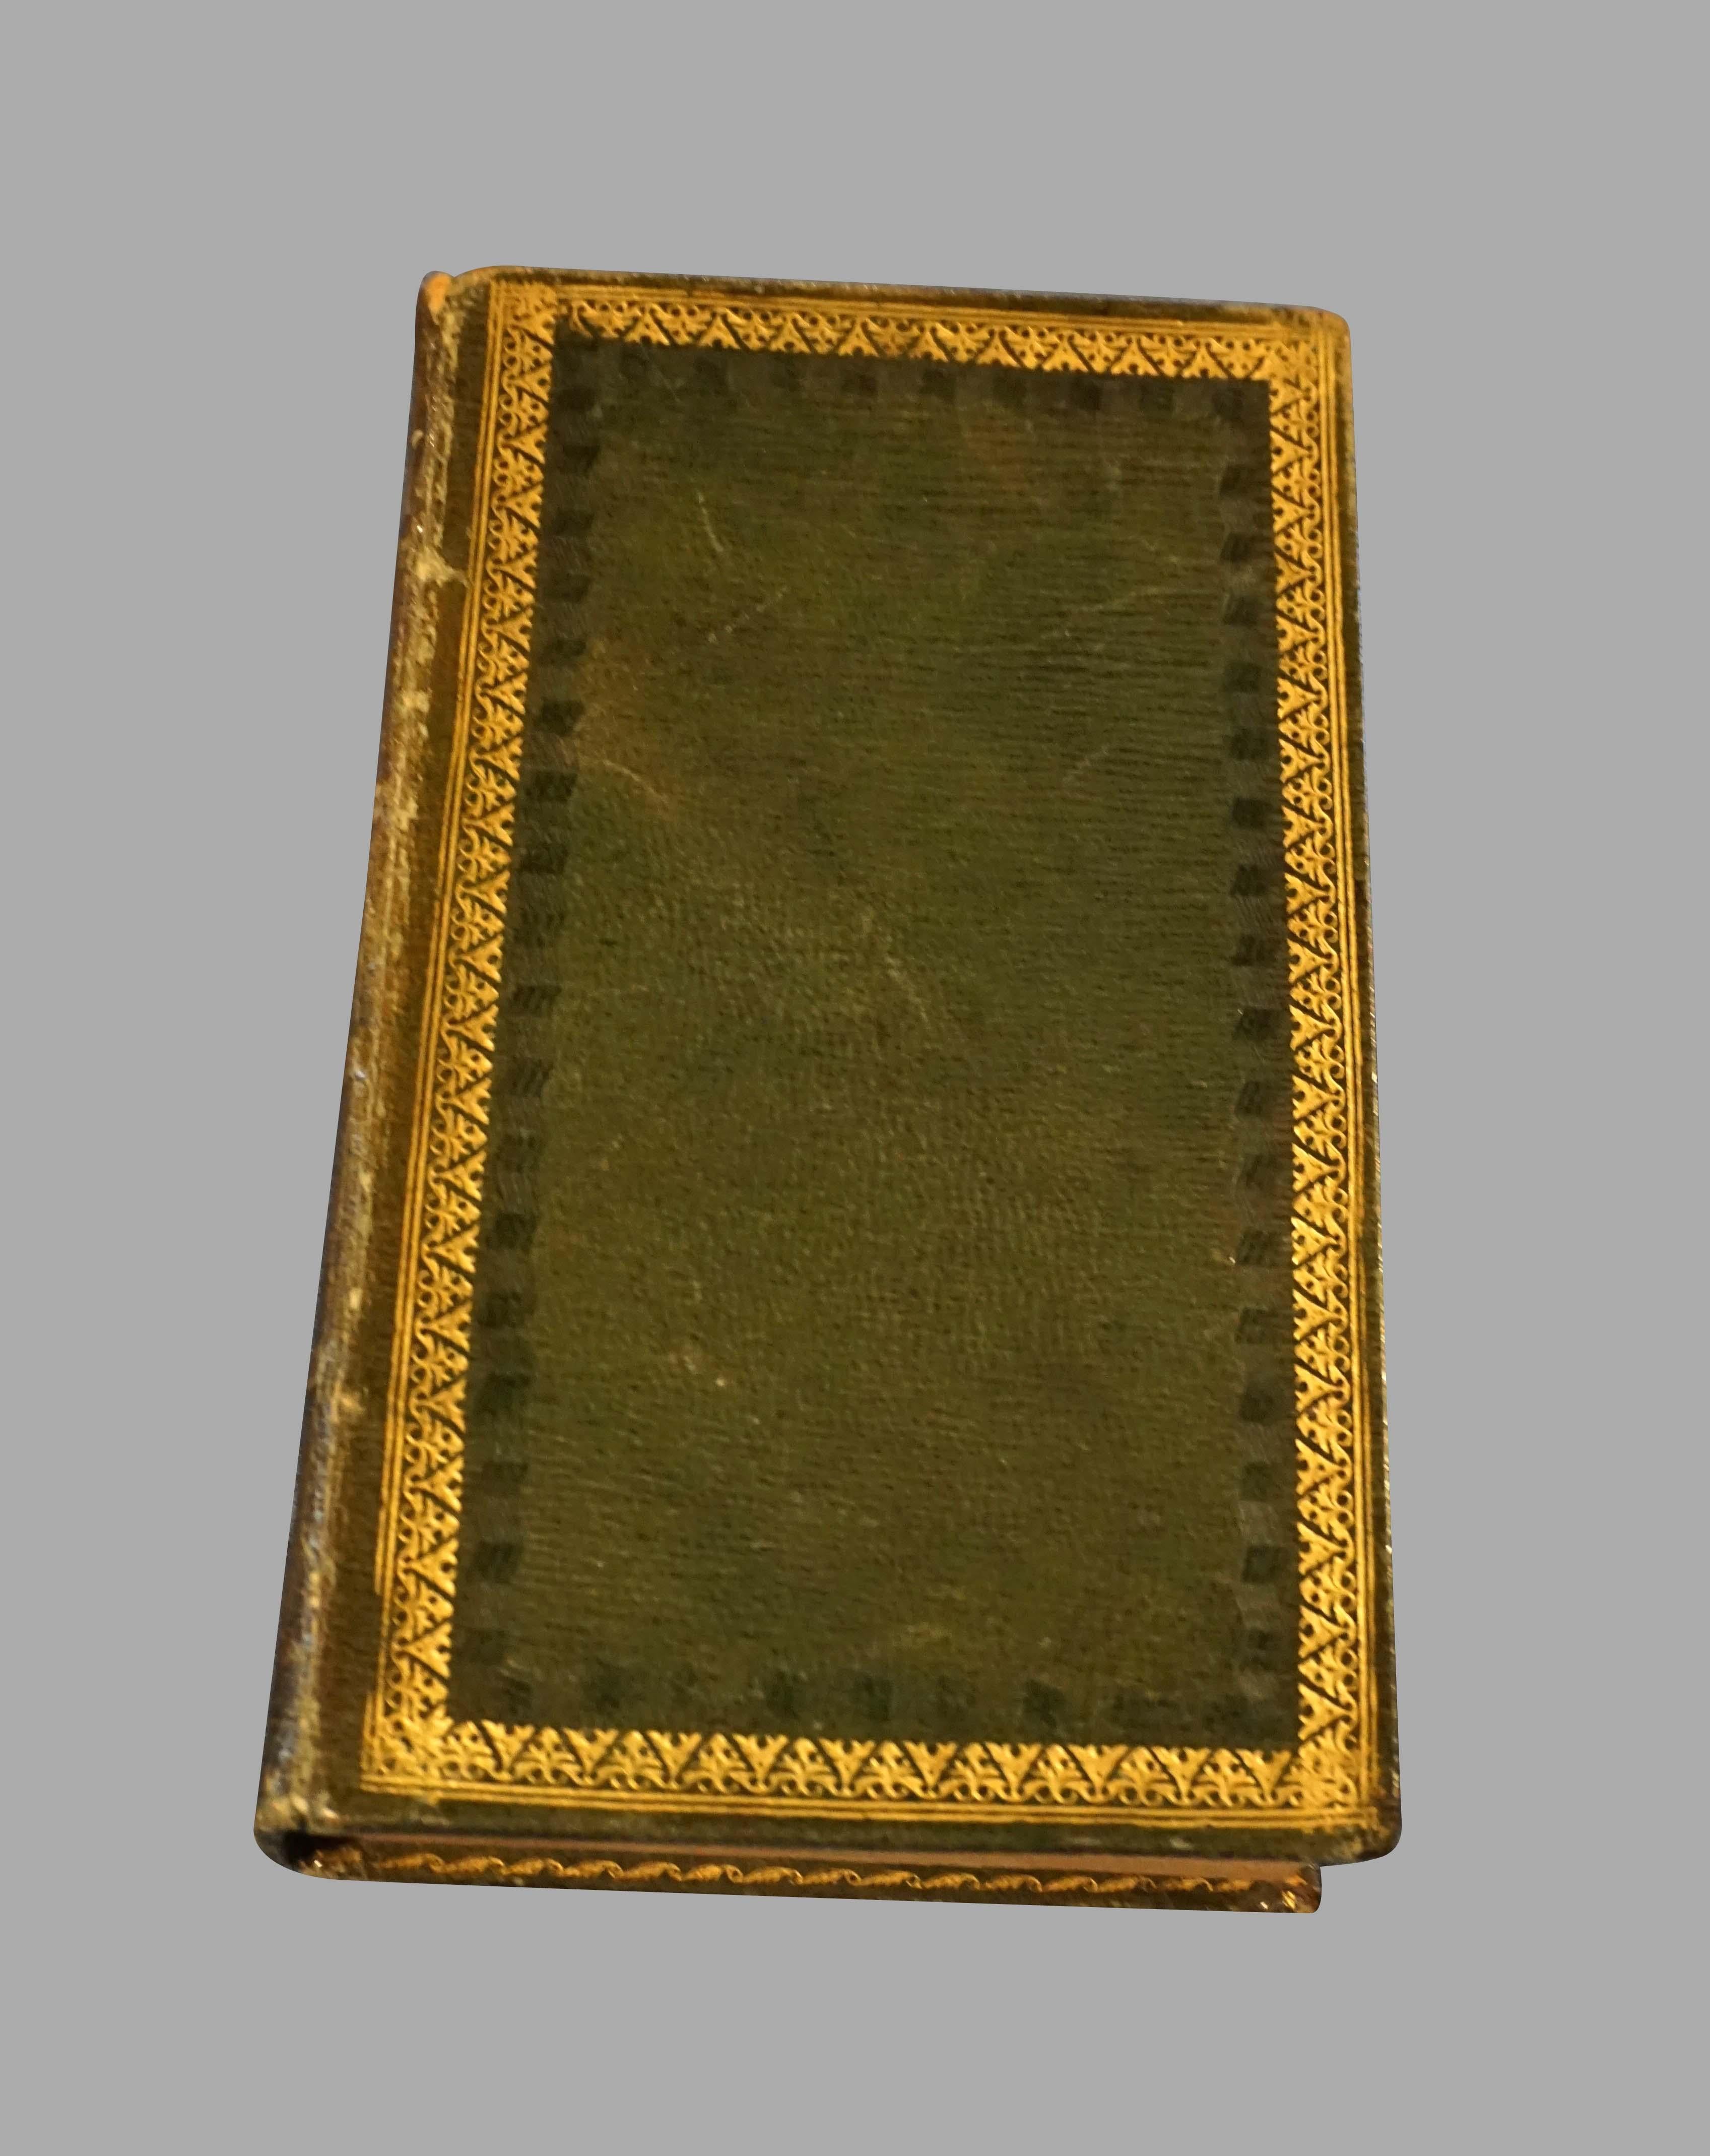 The complete works of Sir Walter Scott in 42 volumes, including such classics as Rob Roy and Woodstock. Full green leather binding with gilt-tooling and raised spines, all edges gilt. Bookplates of former owner. Published 1822-1825 by Archibald,